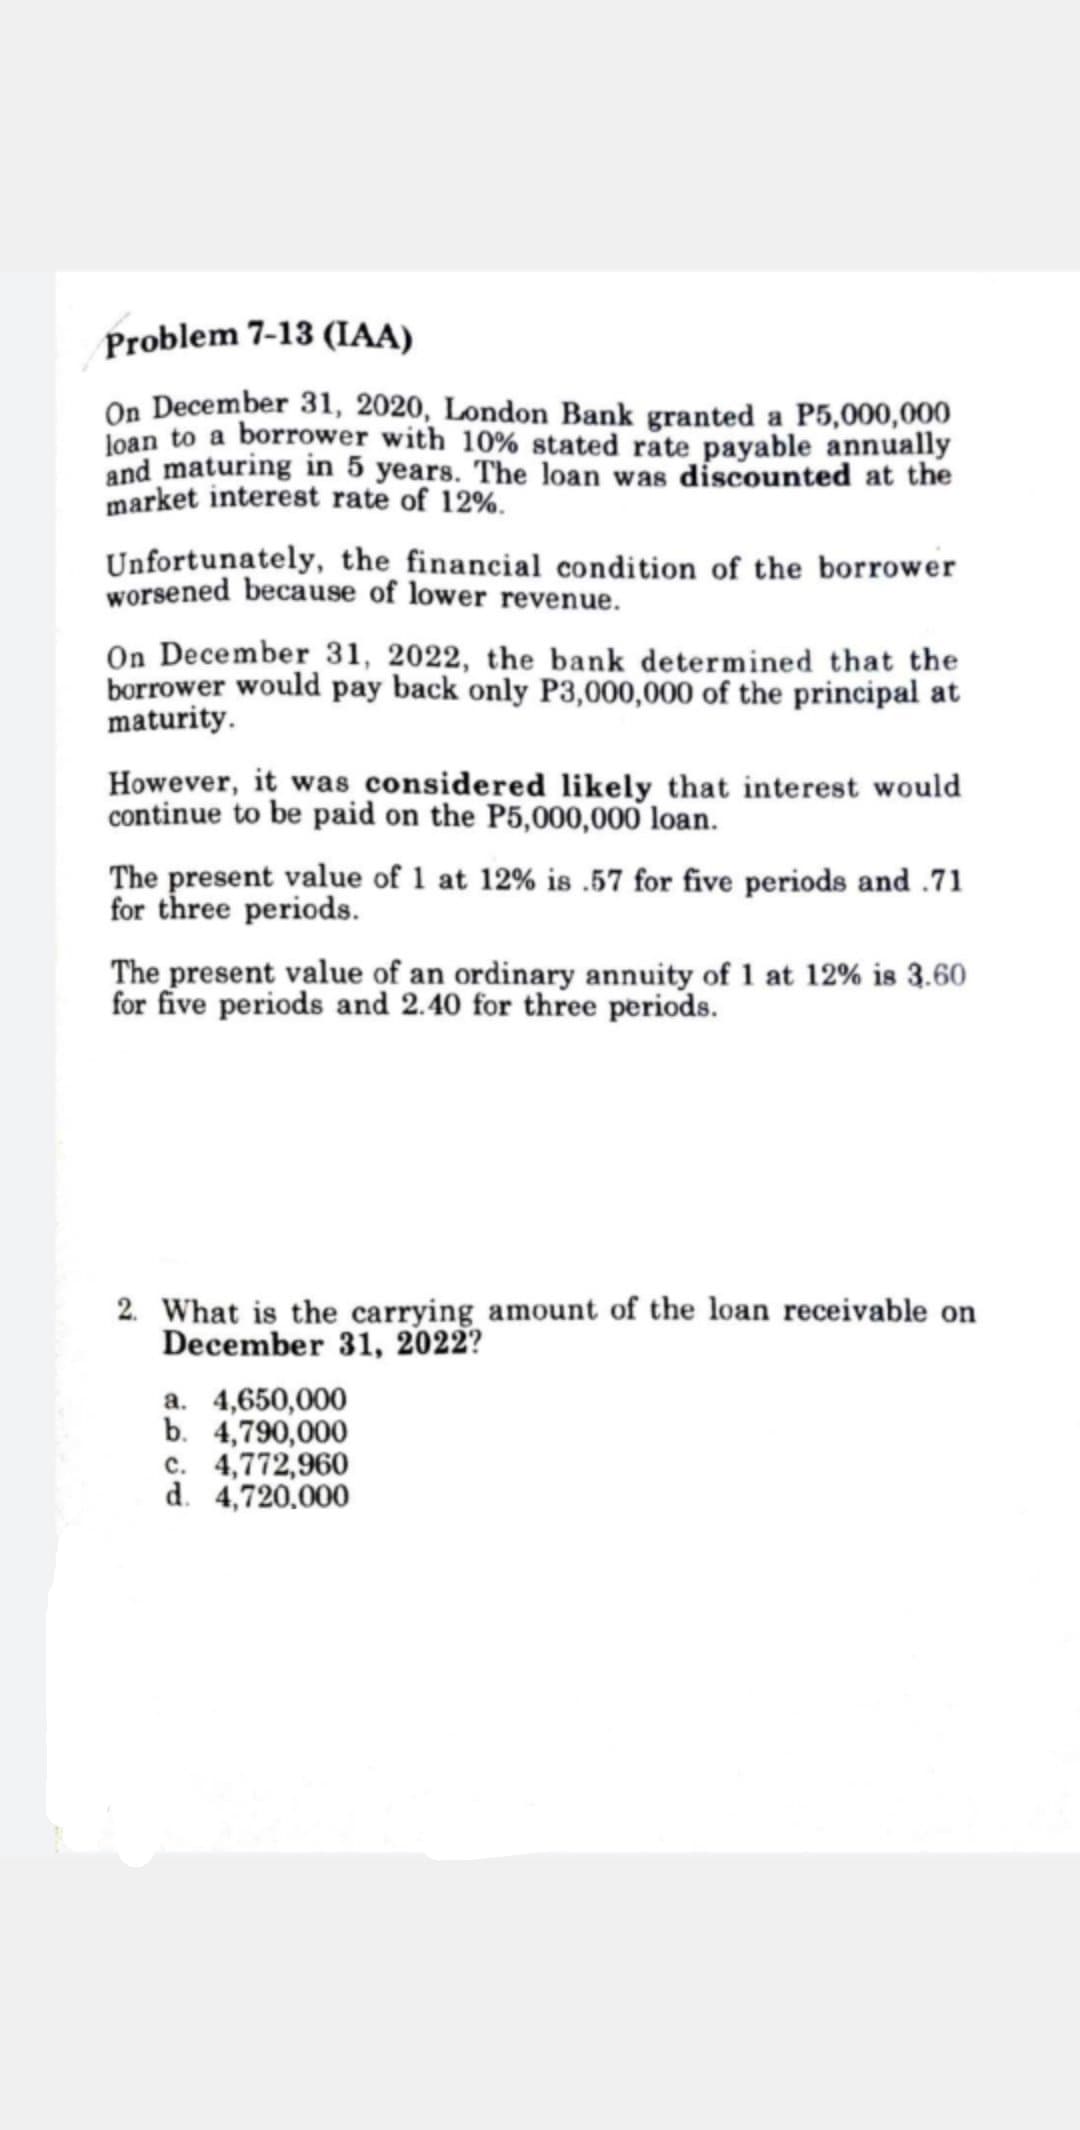 Problem 7-13 (IAA)
On December 31, 2020, London Bank granted a P5,000,000
Joan to a borrower with 10% stated rate payable annually
and maturing in 5 years. The loan was discounted at the
market interest rate of 12%.
Unfortunately, the financial condition of the borrower
worsened because of lower revenue.
On December 31, 2022, the bank determined that the
borrower would pay back only P3,000,000 of the principal at
maturity.
However, it was considered likely that interest would
continue to be paid on the P5,000,000 loan.
The present value of 1 at 12% is .57 for five periods and .71
for three periods.
The present value of an ordinary annuity of 1 at 12% is 3.60
for five periods and 2.40 for three periods.
2. What is the carrying amount of the loan receivable on
December 31, 2022?
a. 4,650,000
b. 4,790,000
c. 4,772,960
d. 4,720.000
